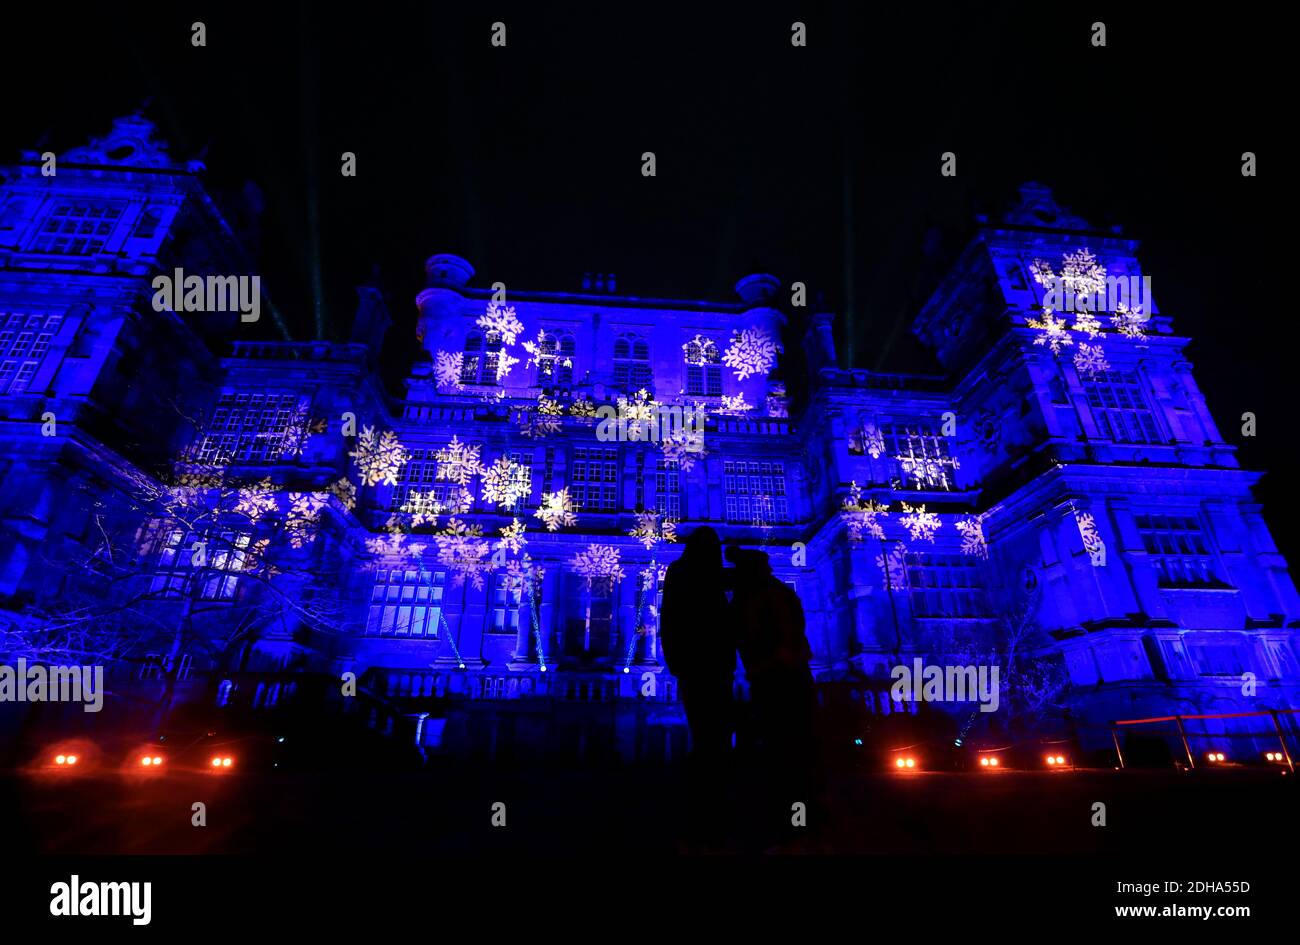 Wollaton Hall in Nottingham which has been transformed into an enchanted light experience to create Christmas at Wollaton Hall, a unique, socially distanced festive outdoor light installation. Stock Photo